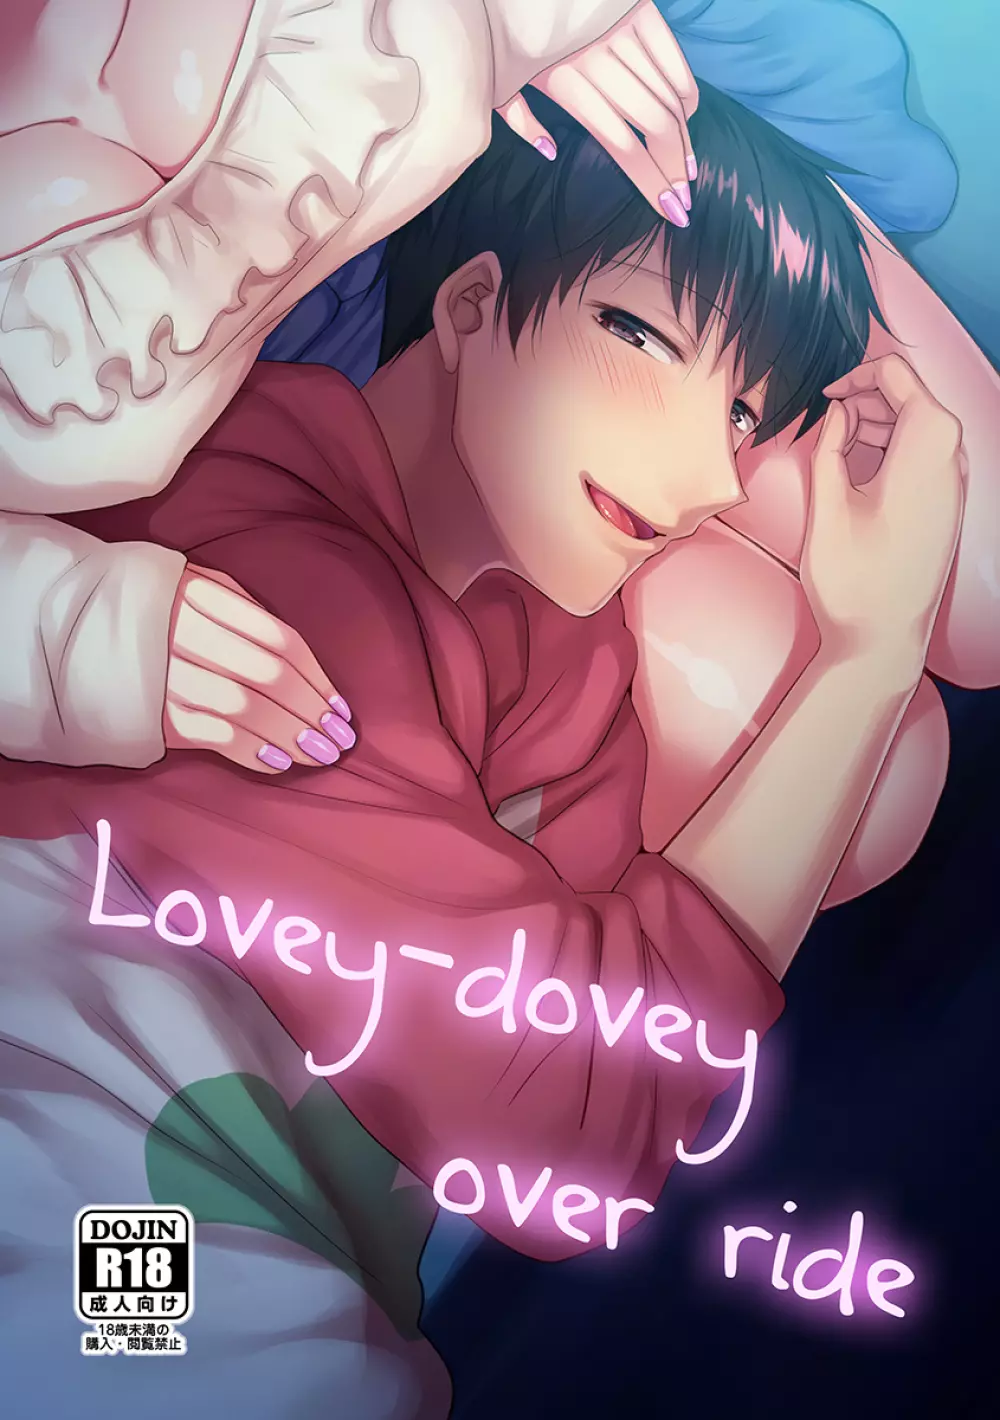 Lovey-dovey over ride